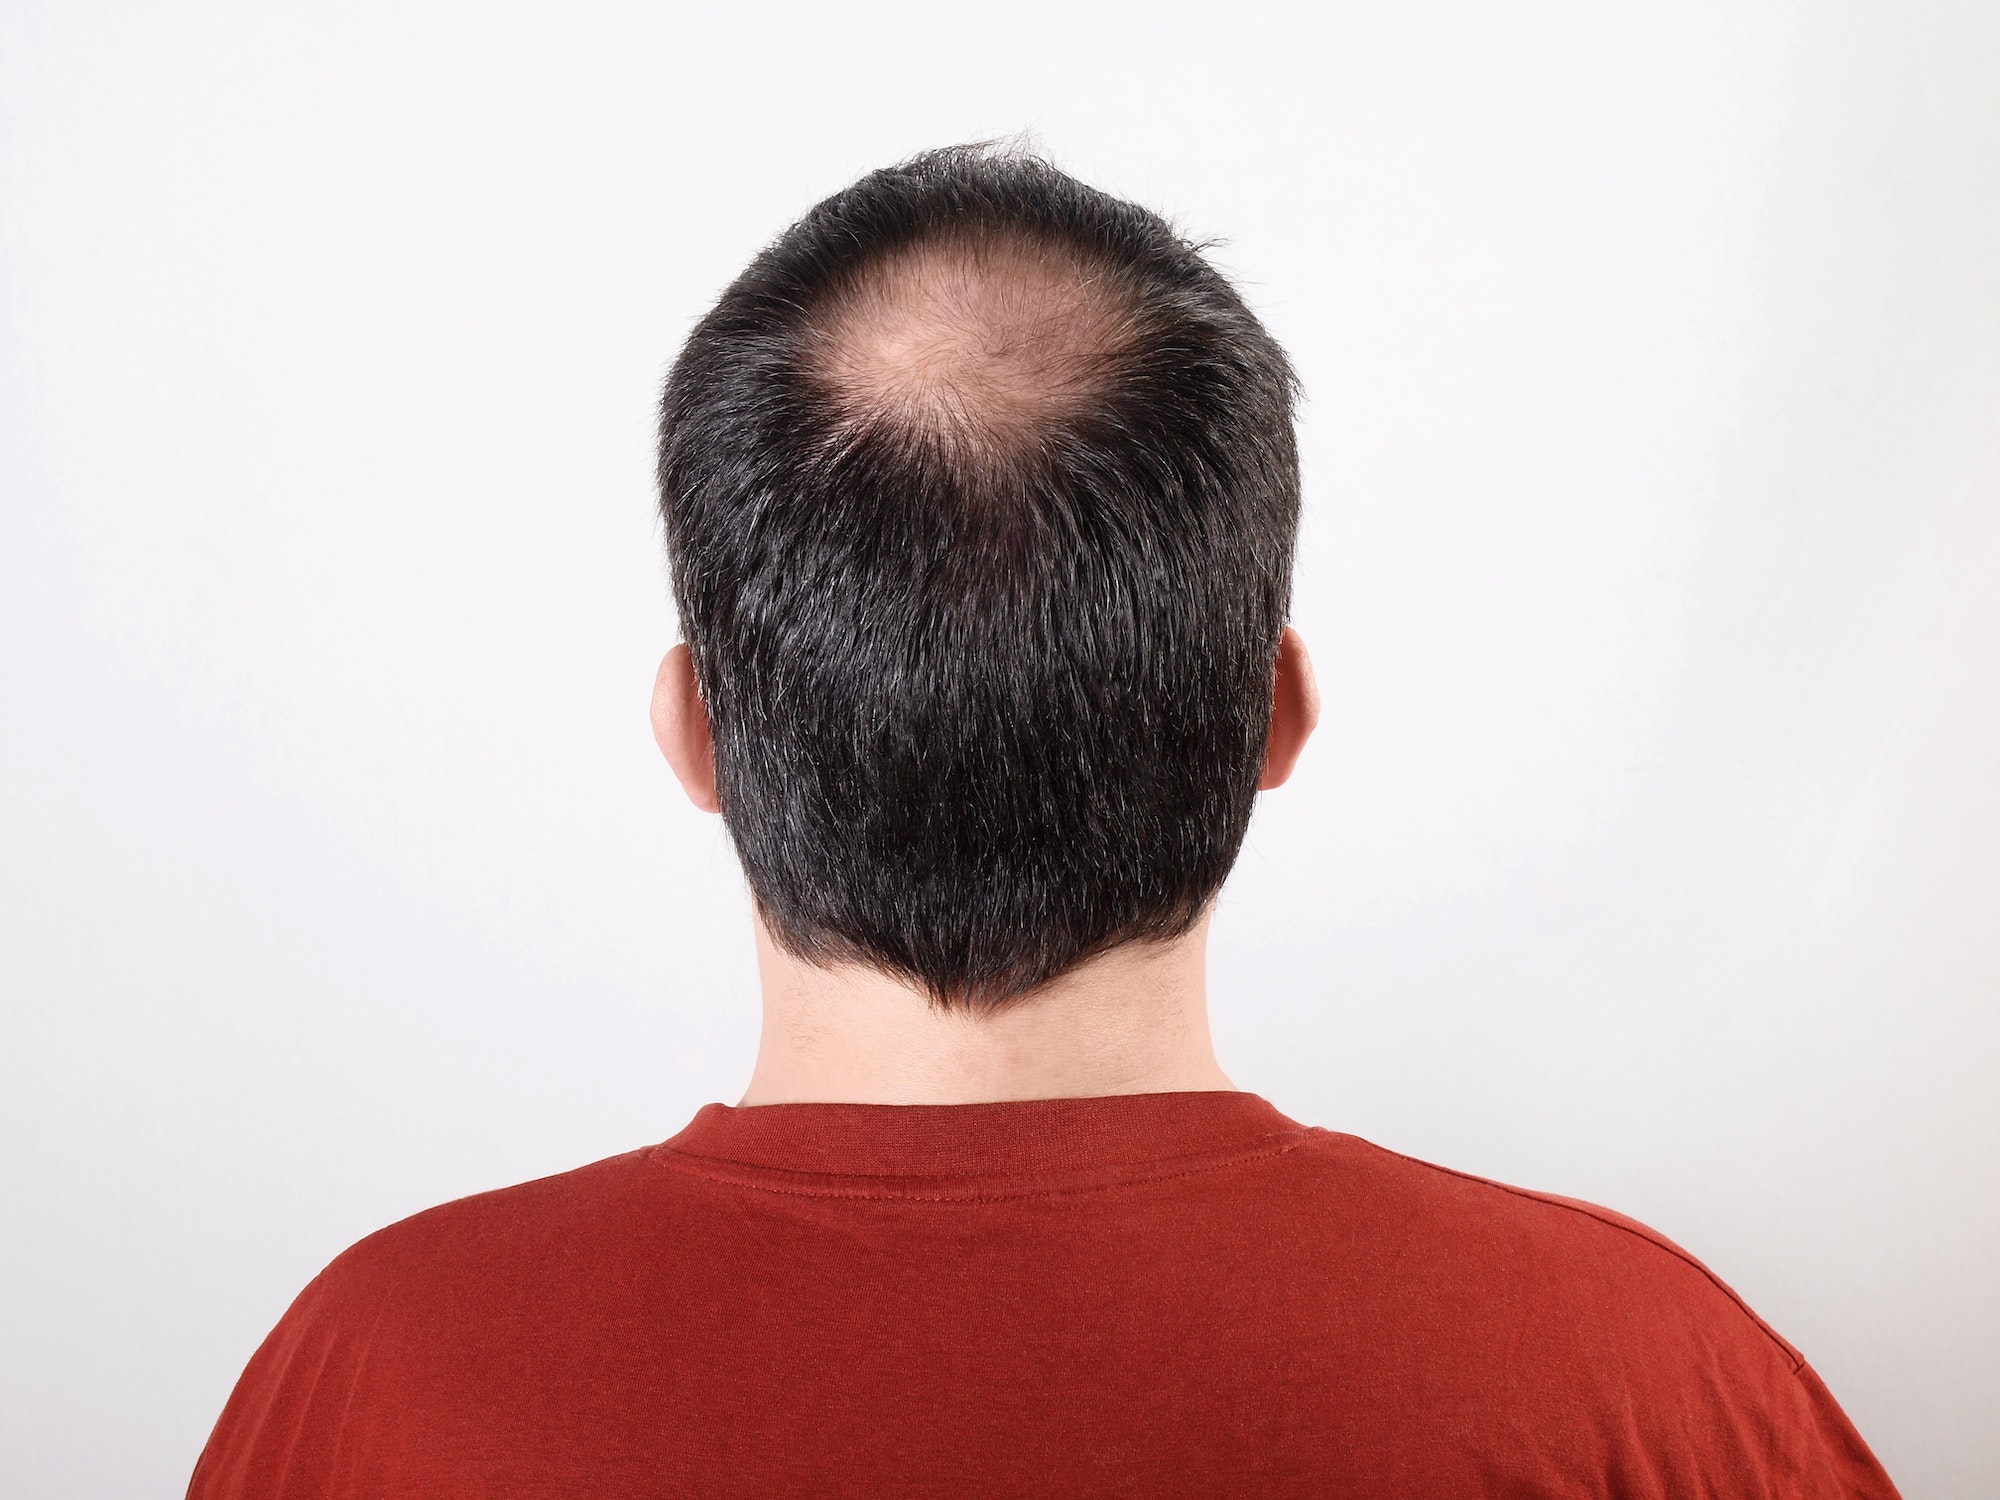 back of male head with thinning hair or alopecia or hair loss